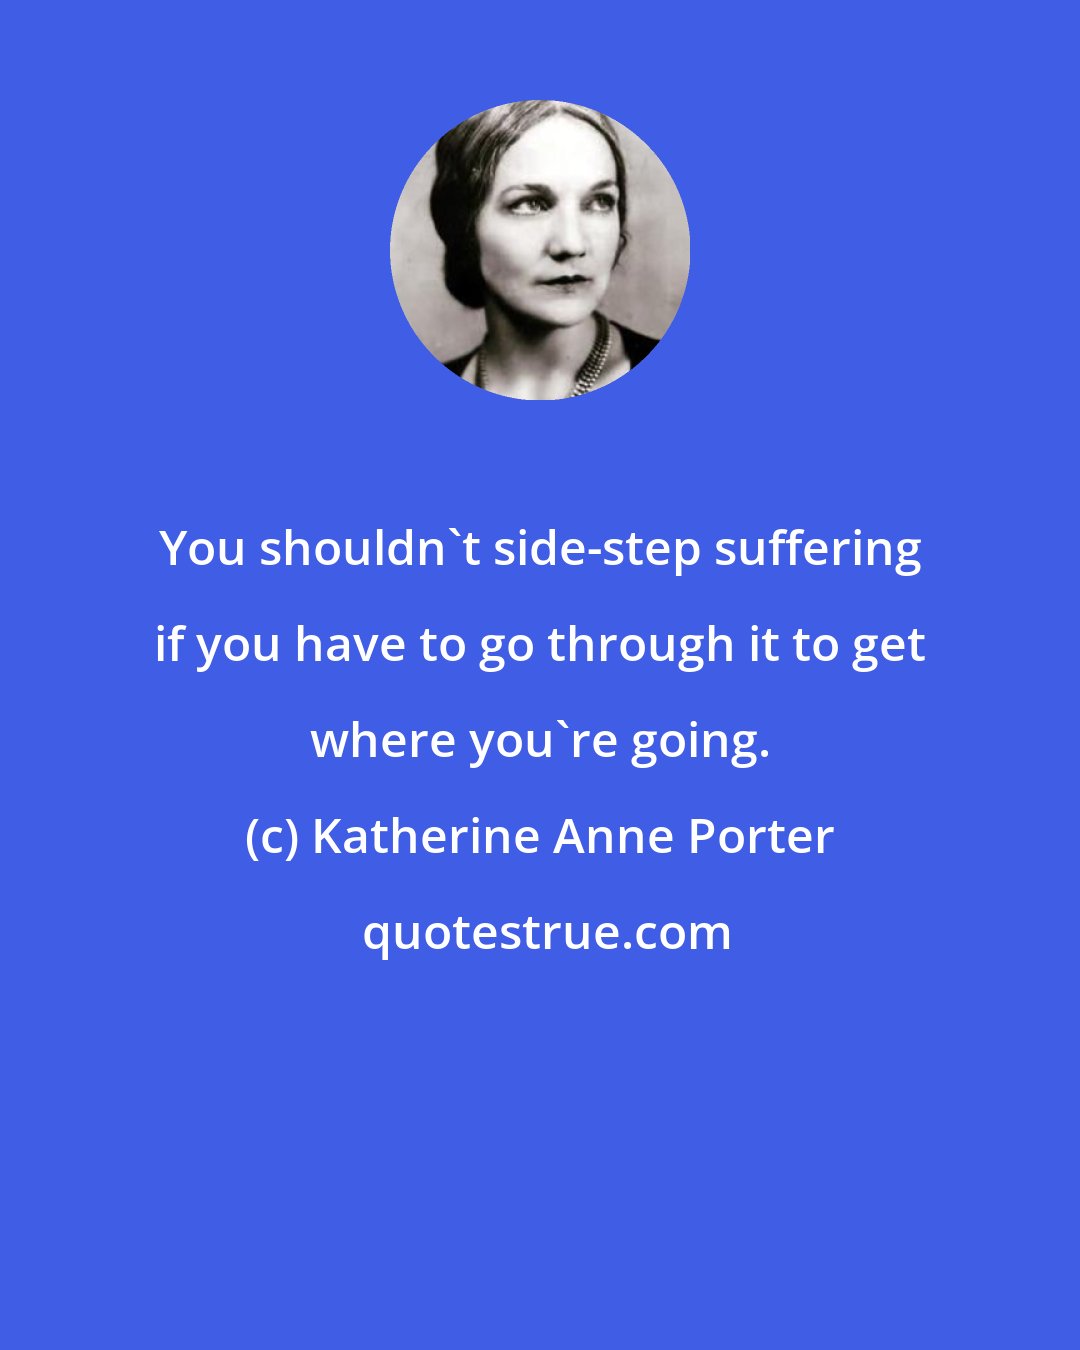 Katherine Anne Porter: You shouldn't side-step suffering if you have to go through it to get where you're going.